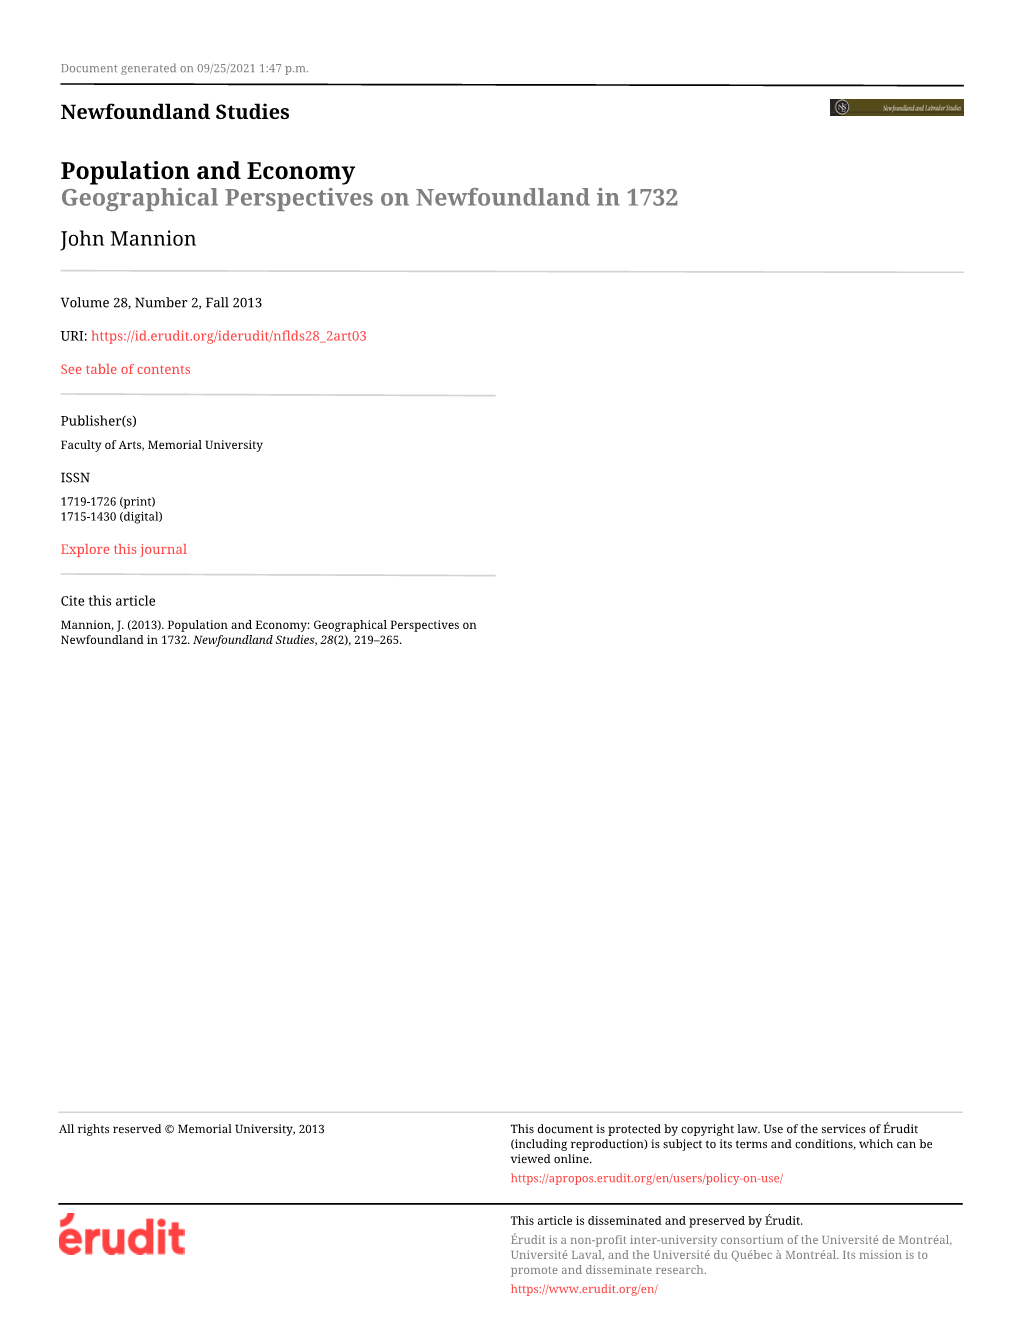 Population and Economy: Geographical Perspectives on Newfoundland in 1732